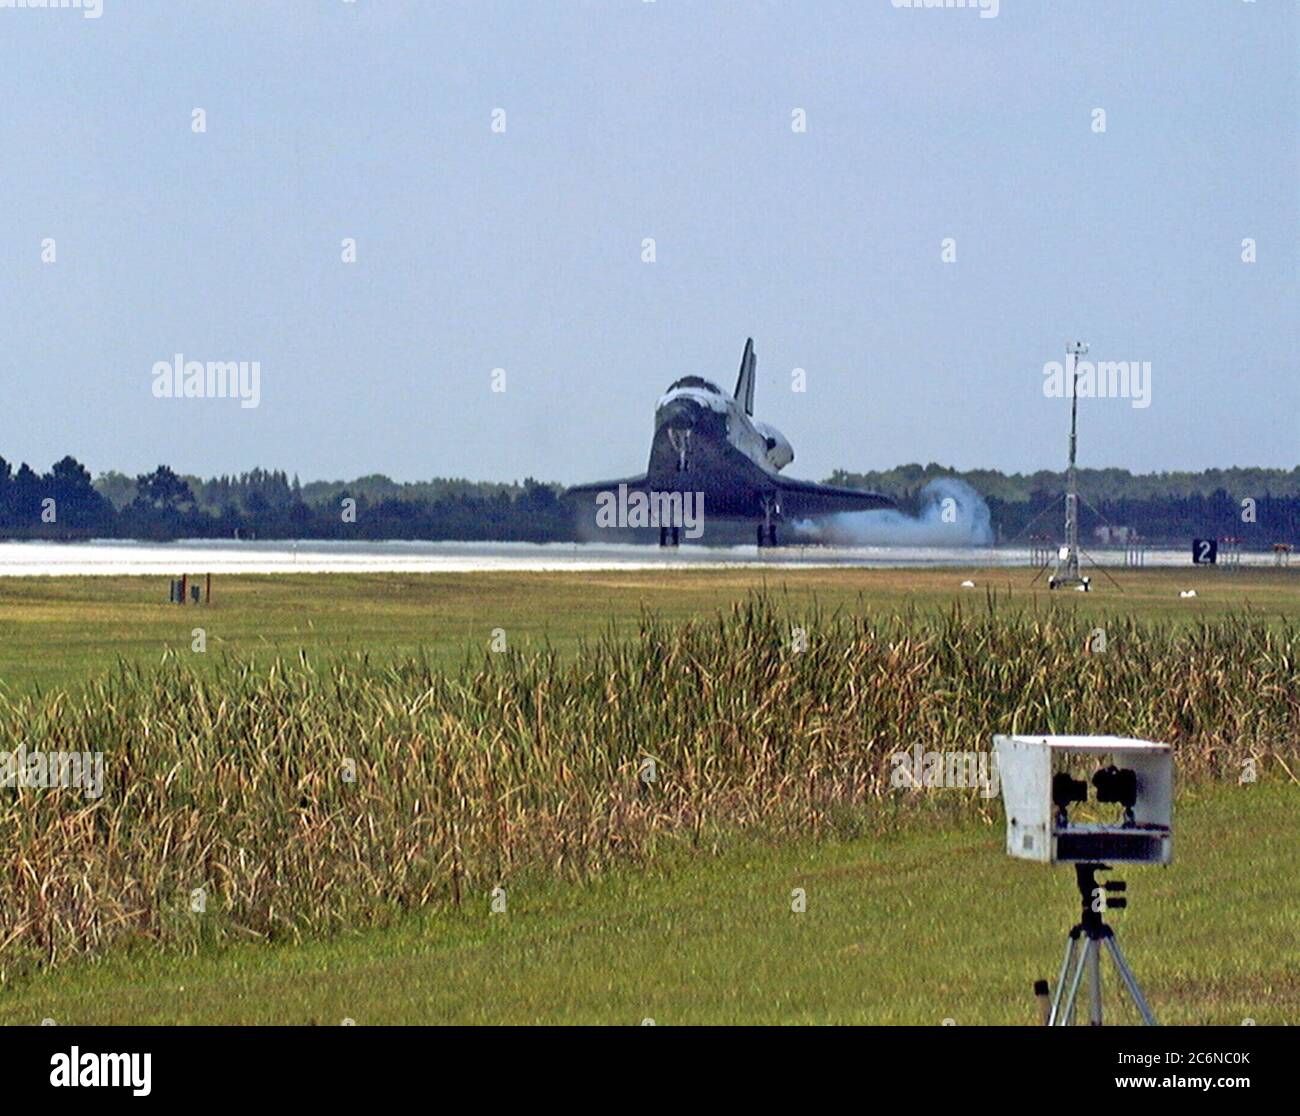 KENNEDY SPACE CENTER, FLA. -- The orbiter Discovery touches down on Runway 15 of KSC's Shuttle Landing Facility to complete the STS-91 mission. Main gear touchdown was at 2:00:18 p.m. EDT on June 12, 1998, landing on orbit 155 of the mission. The wheels stopped at 2:01:22 p.m. EDT, for a total mission-elapsed time of 9 days, 19 hours, 55 minutes and 1 second. Stock Photo